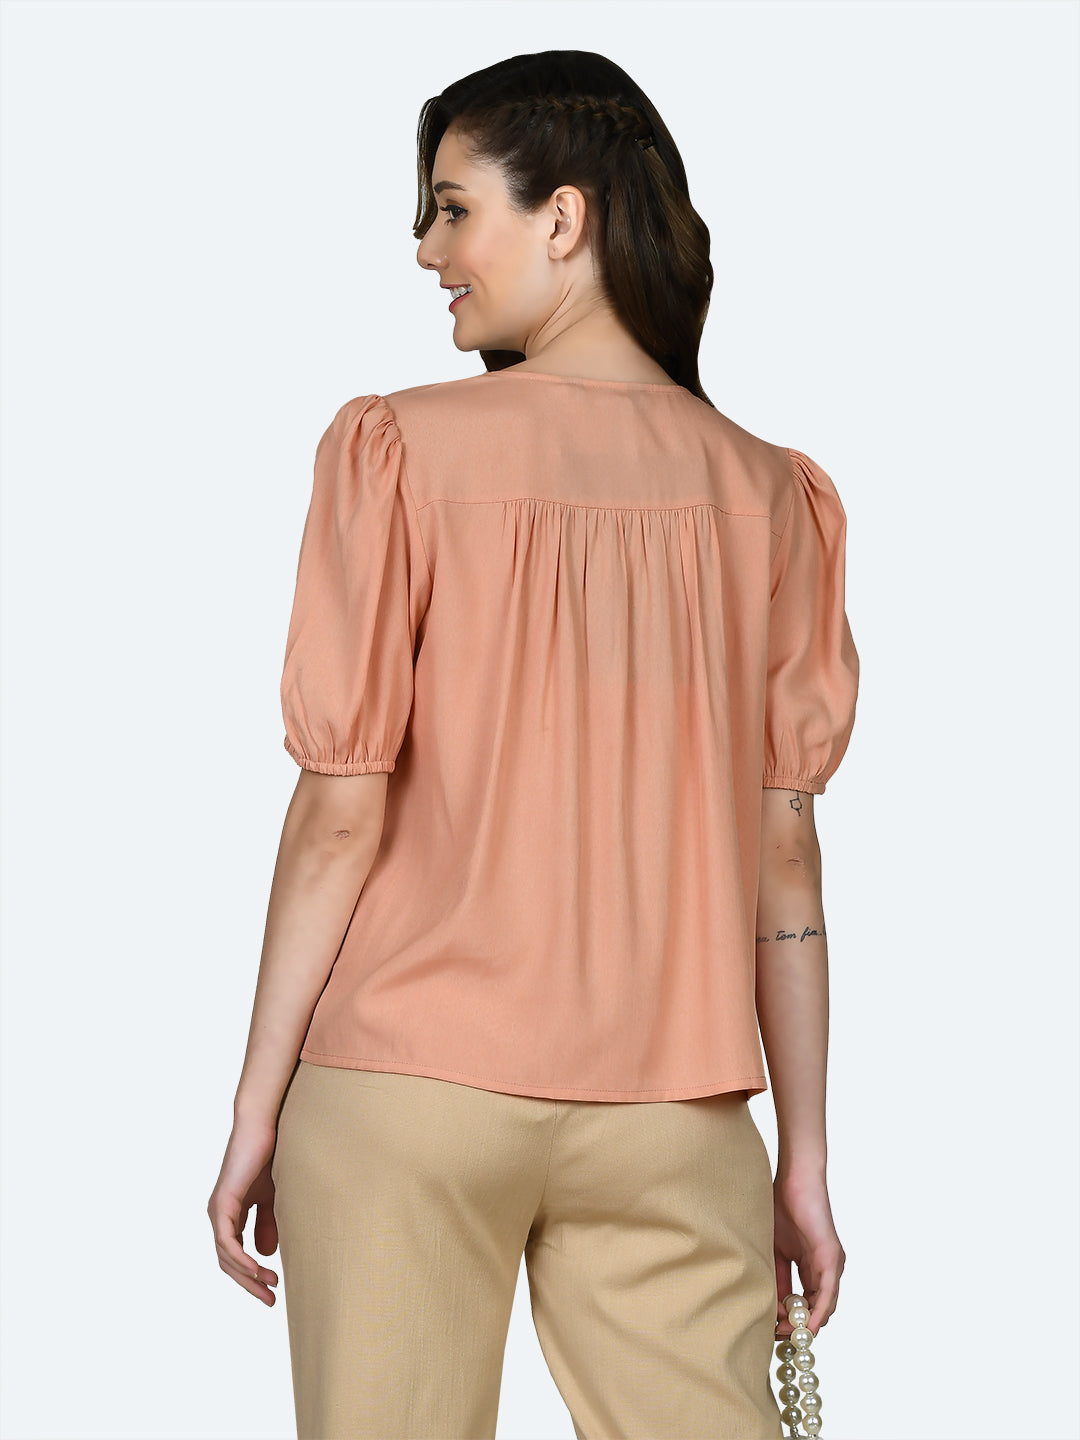 Peach Solid Gathered Top For Women